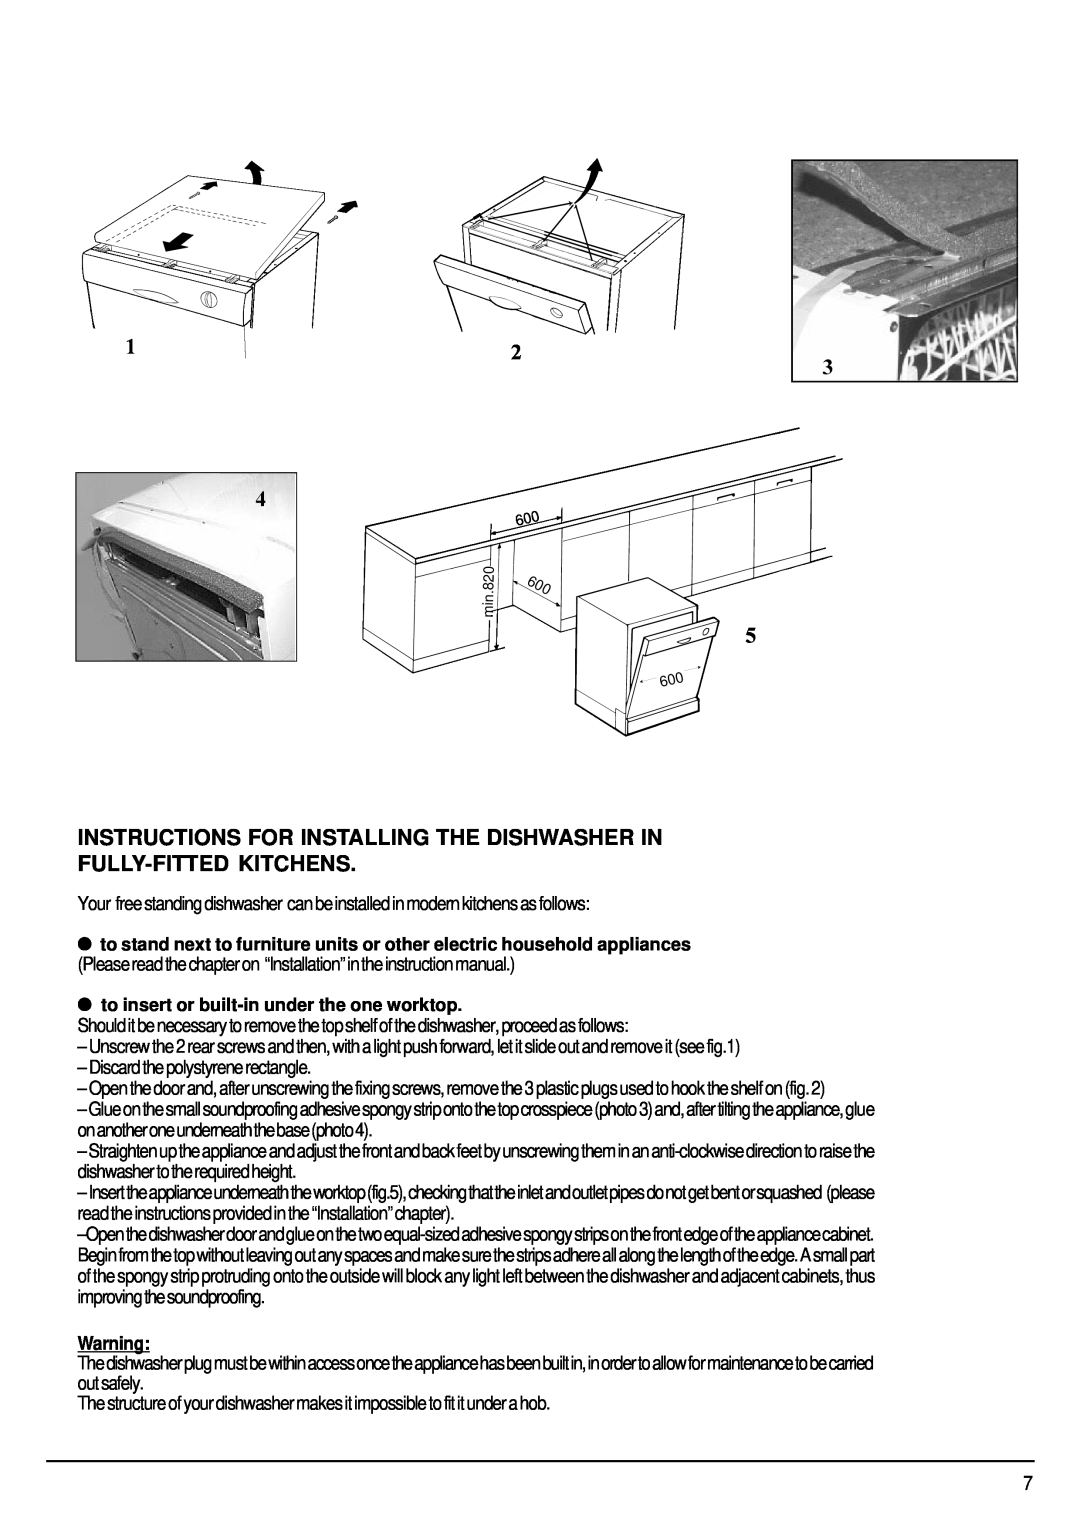 Hotpoint FDW80 manual Instructions For Installing The Dishwasher In, Fully-Fittedkitchens 